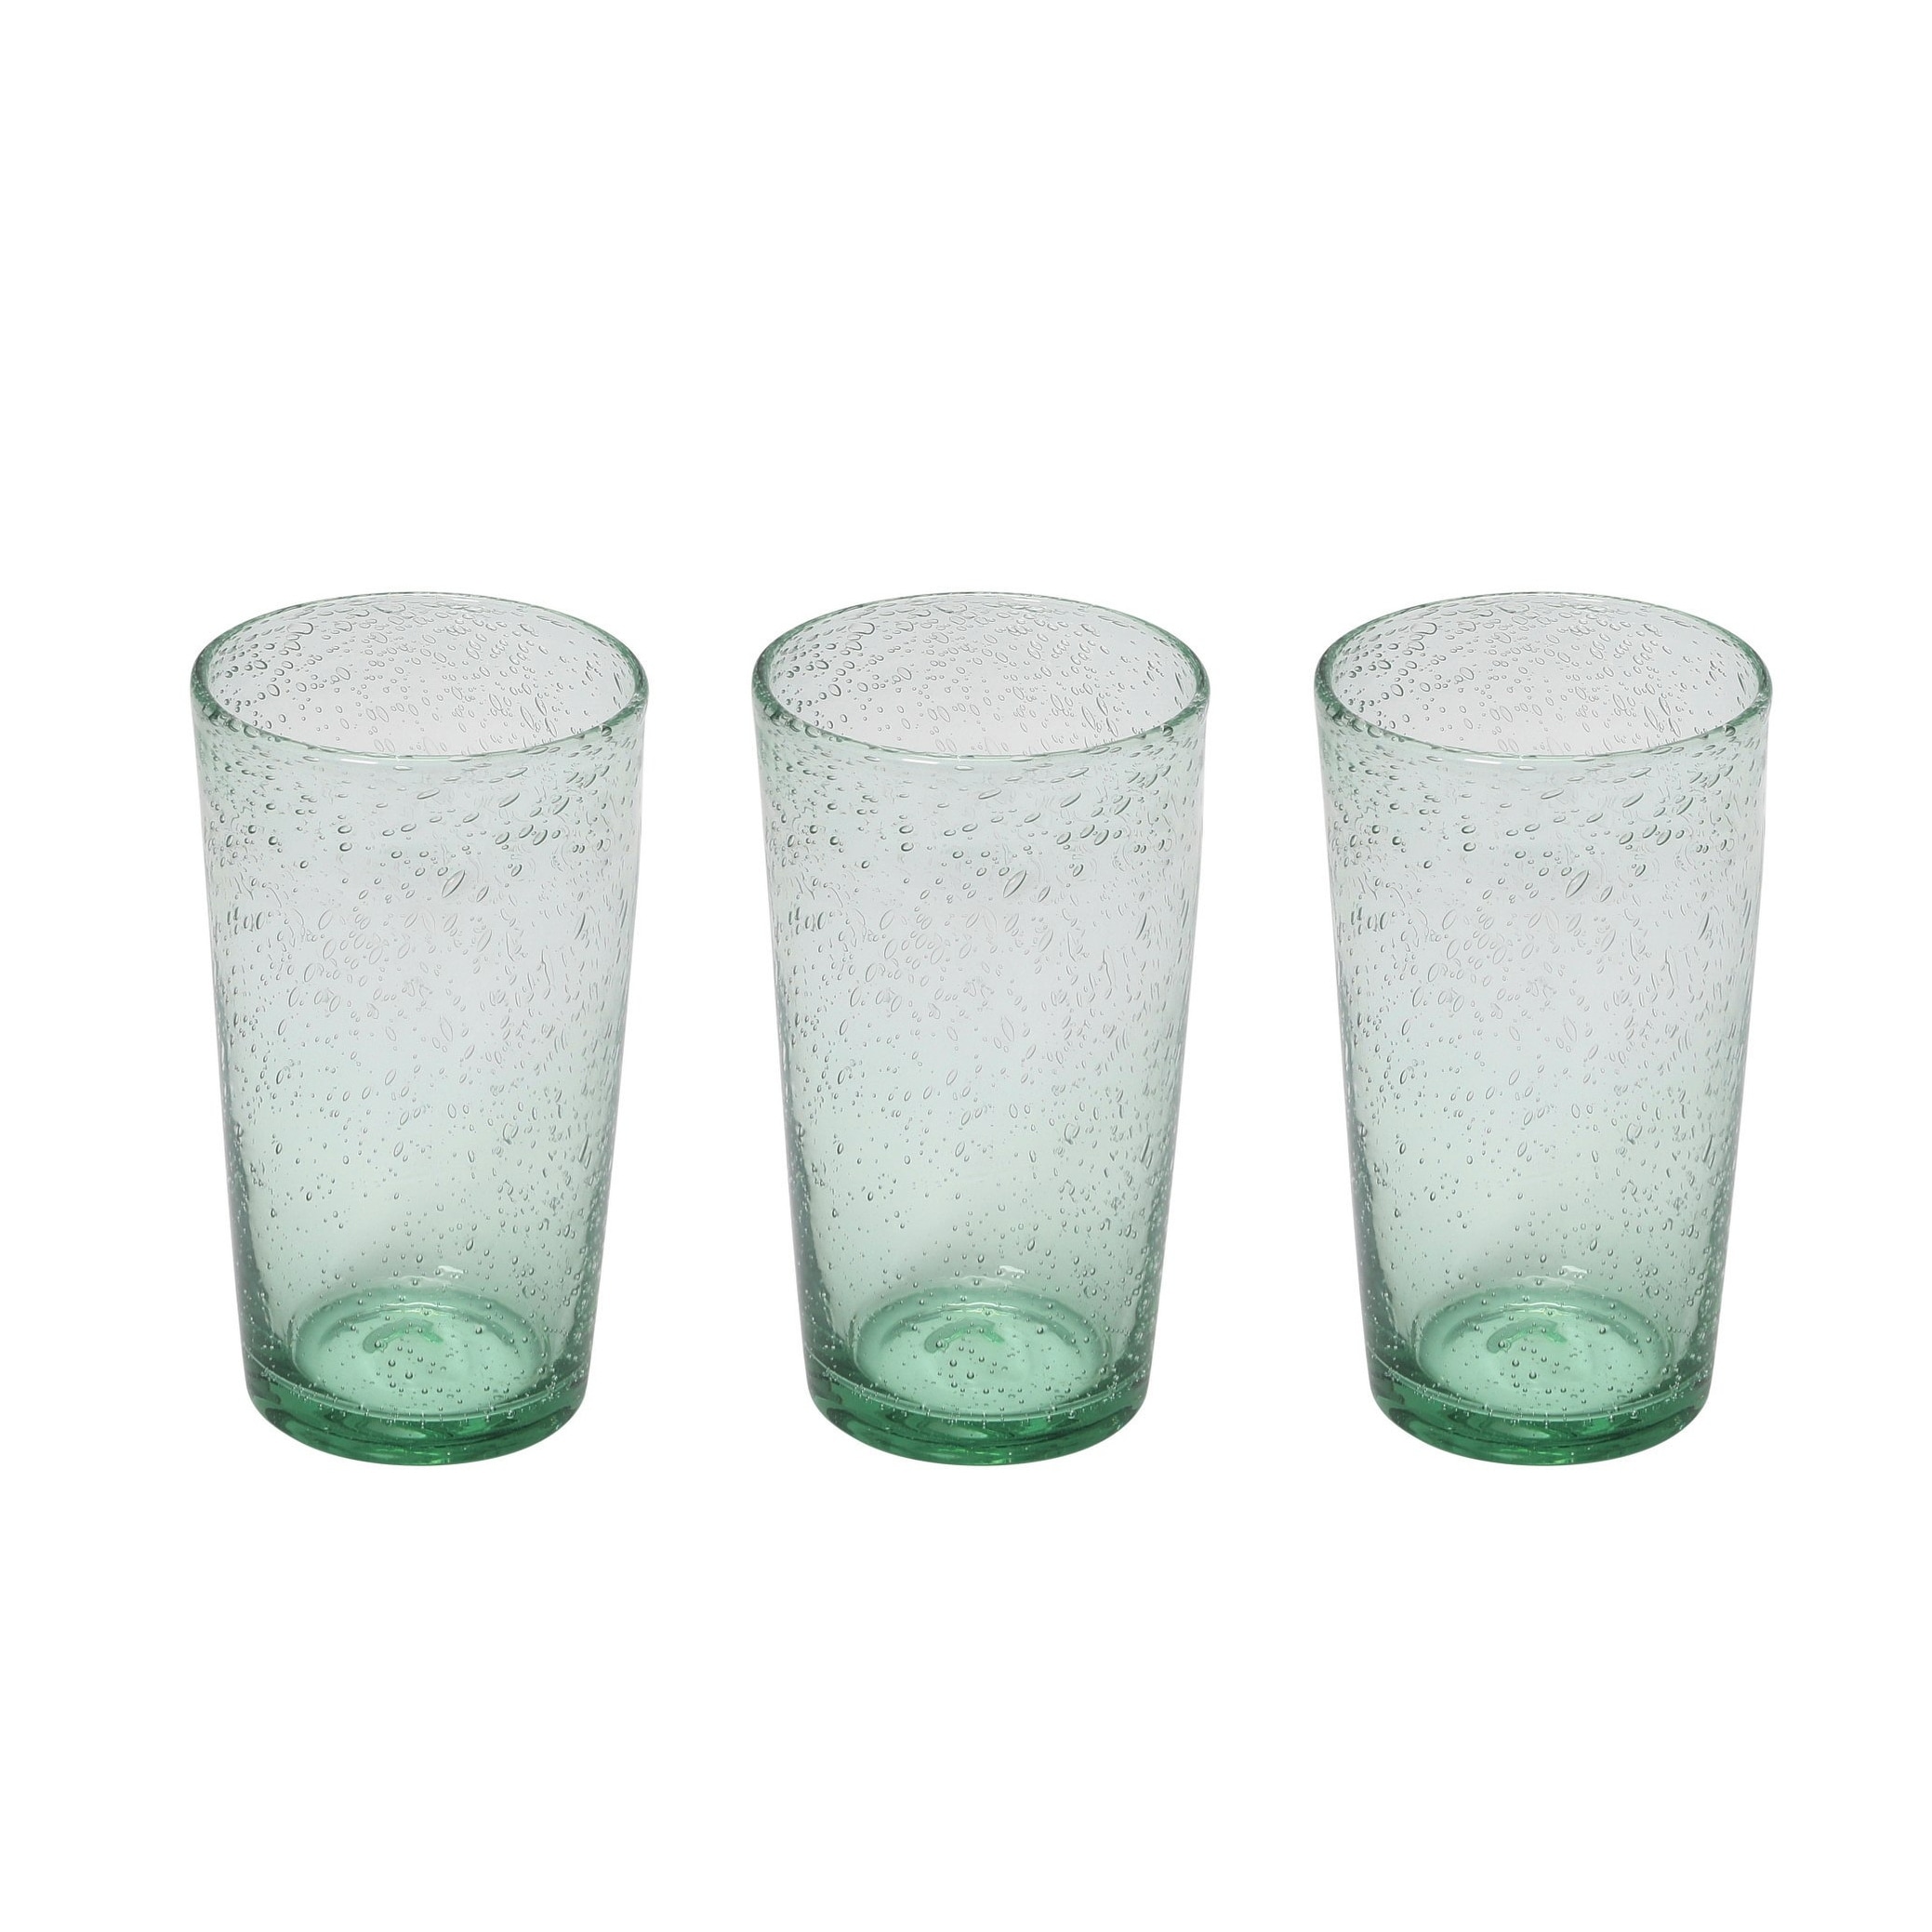 https://ak1.ostkcdn.com/images/products/is/images/direct/f2081e133368164fb4fdd6571b661e8dac65ab6d/Transparent-Bubble-Drinking-Glass.jpg